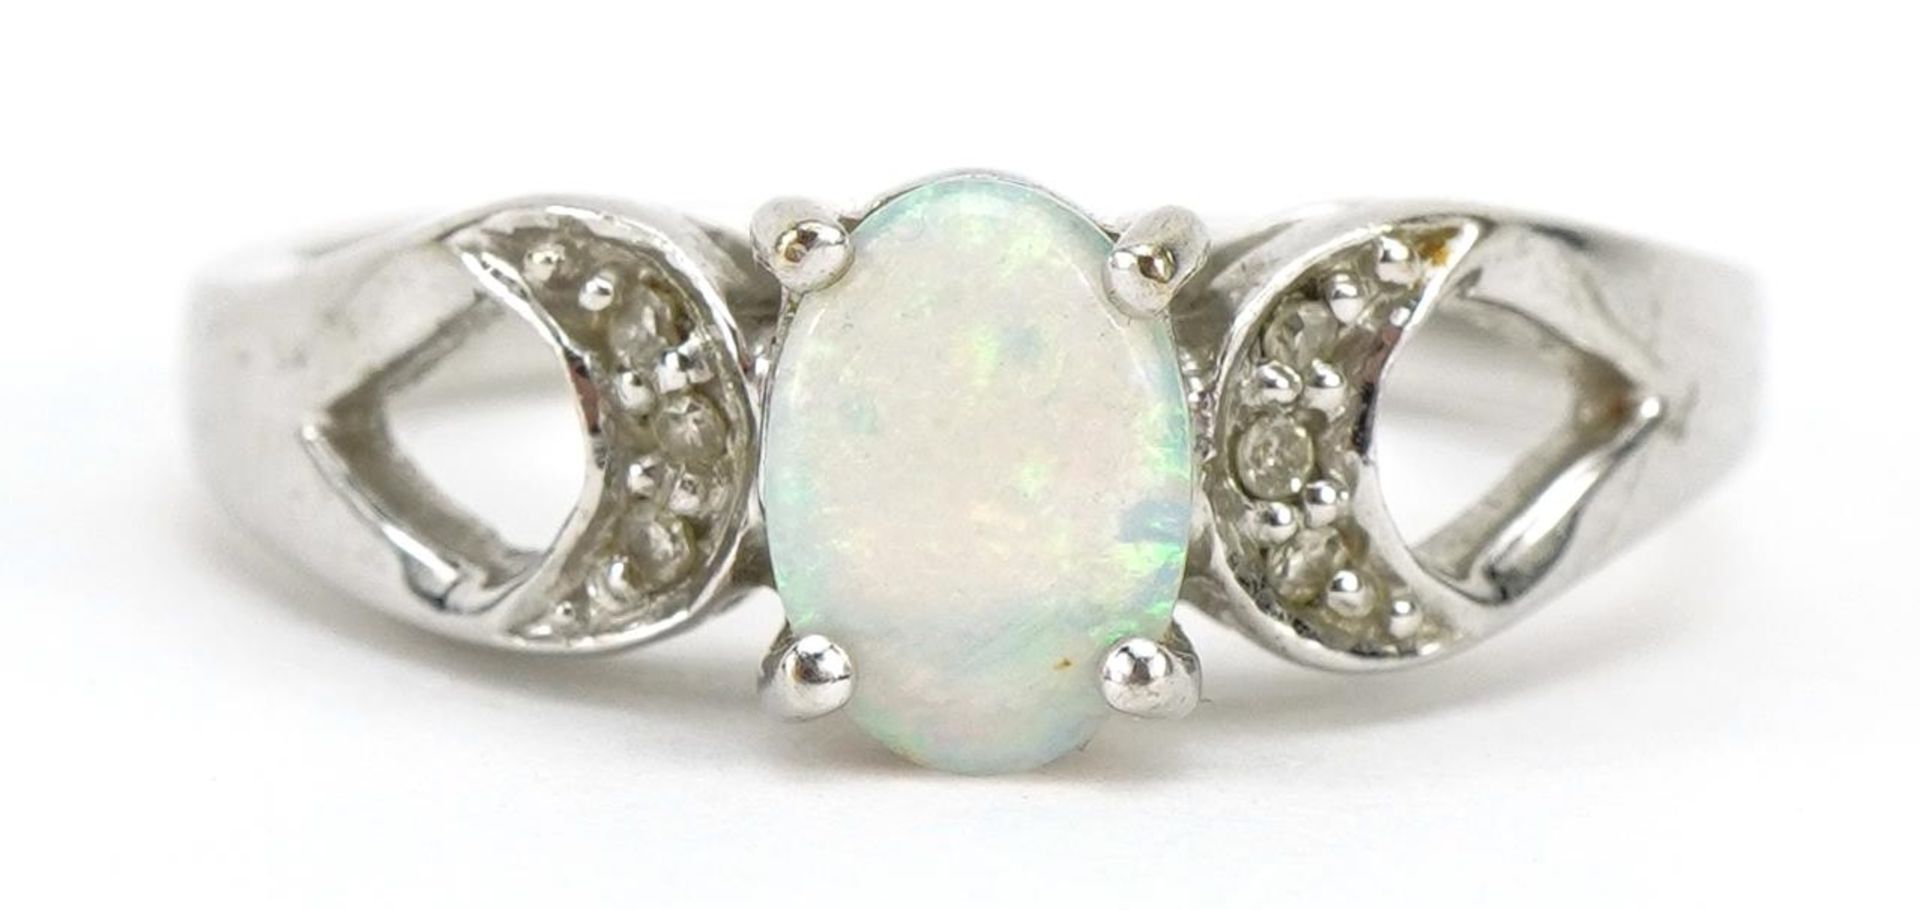 9ct white gold opal and diamond ring with split shoulders, the opal approximately 6.9mm x 4.9mm,